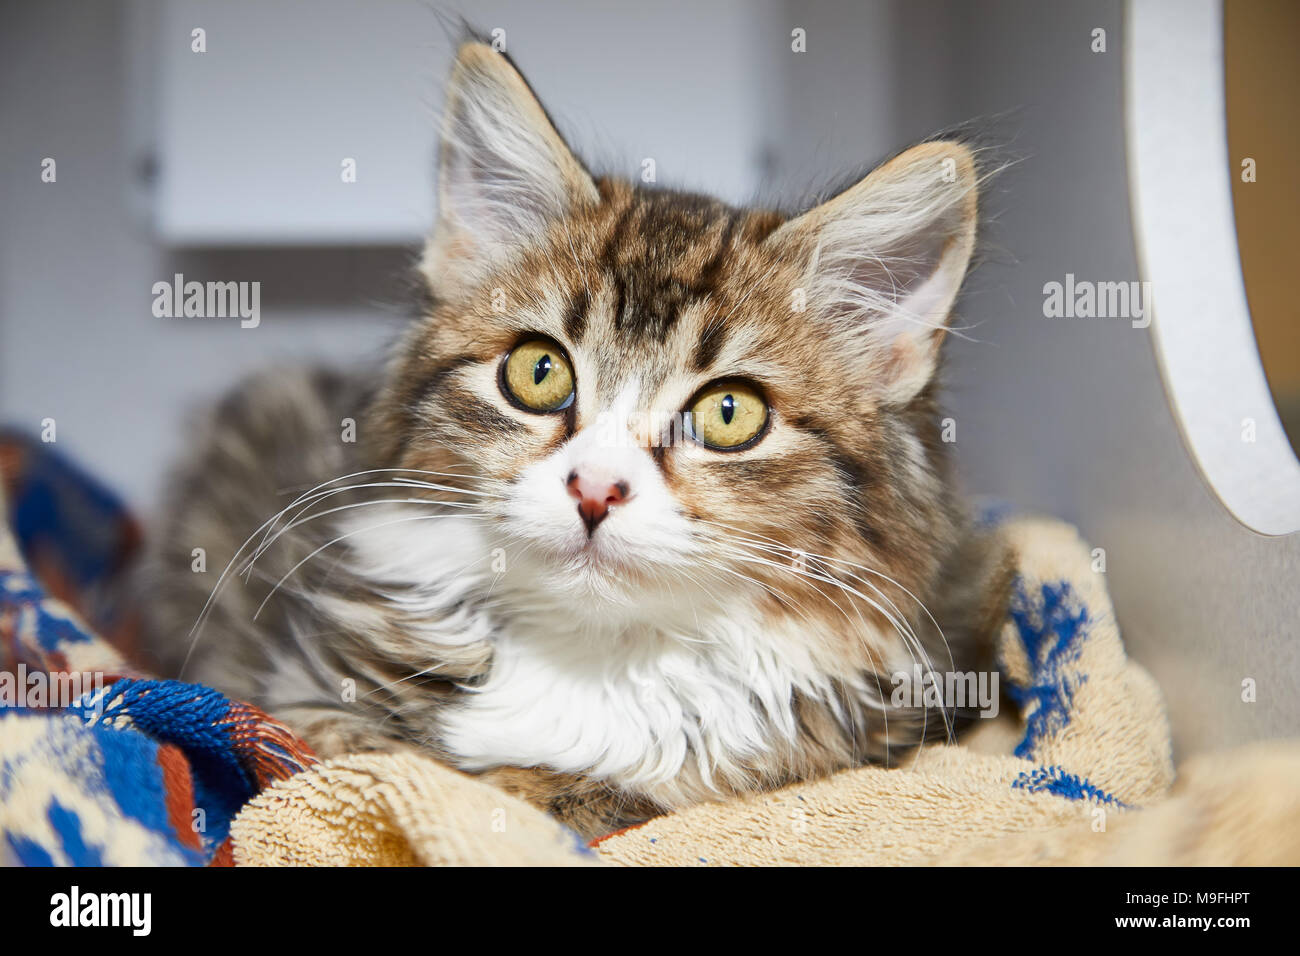 Pretty long-haired tabby cat snuggling into warm blankets and towels in a box bed looking curiously at the camera with big eyes Stock Photo